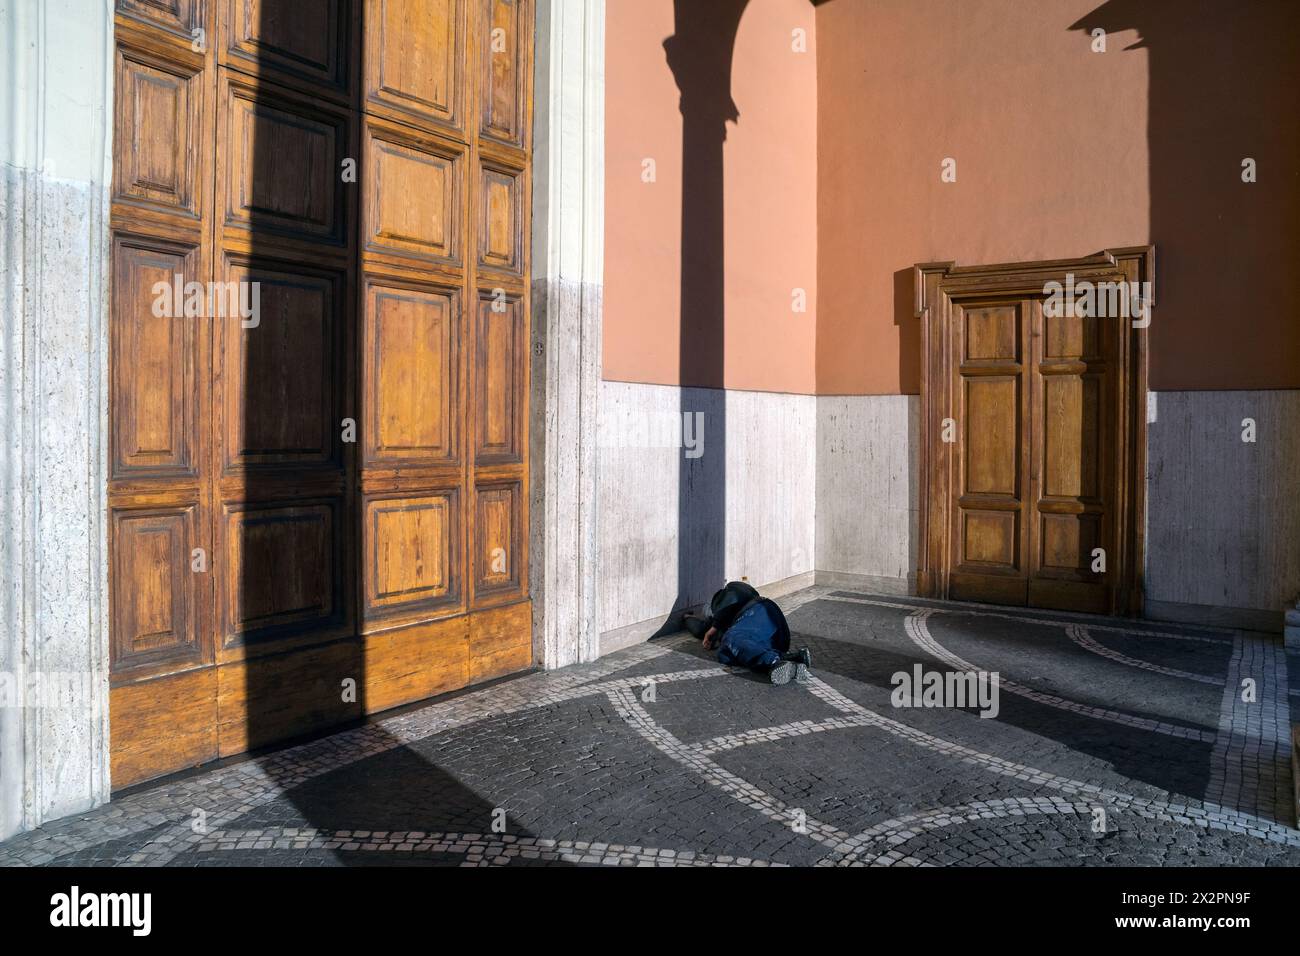 Italy, Rome: a homeless man sleeps lying in the shade of a column in front of the entrance to a closed church Stock Photo